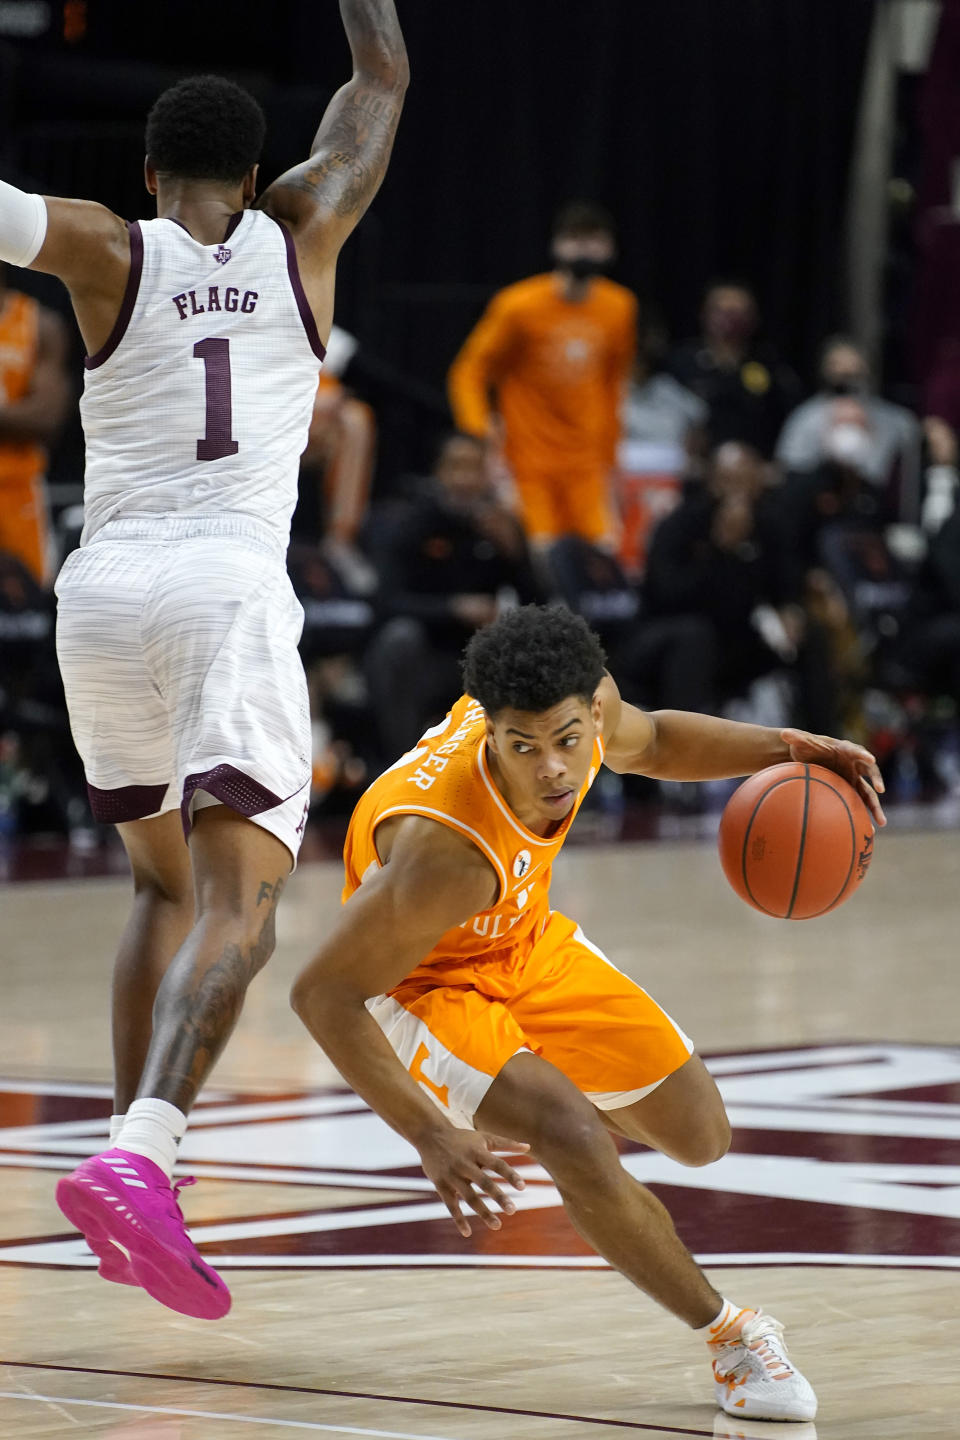 Tennessee guard Jaden Springer (11) drives past Texas A&M guard Savion Flagg (1) during the second half of an NCAA college basketball game Saturday, Jan. 9, 2021, in College Station, Texas. (AP Photo/Sam Craft)